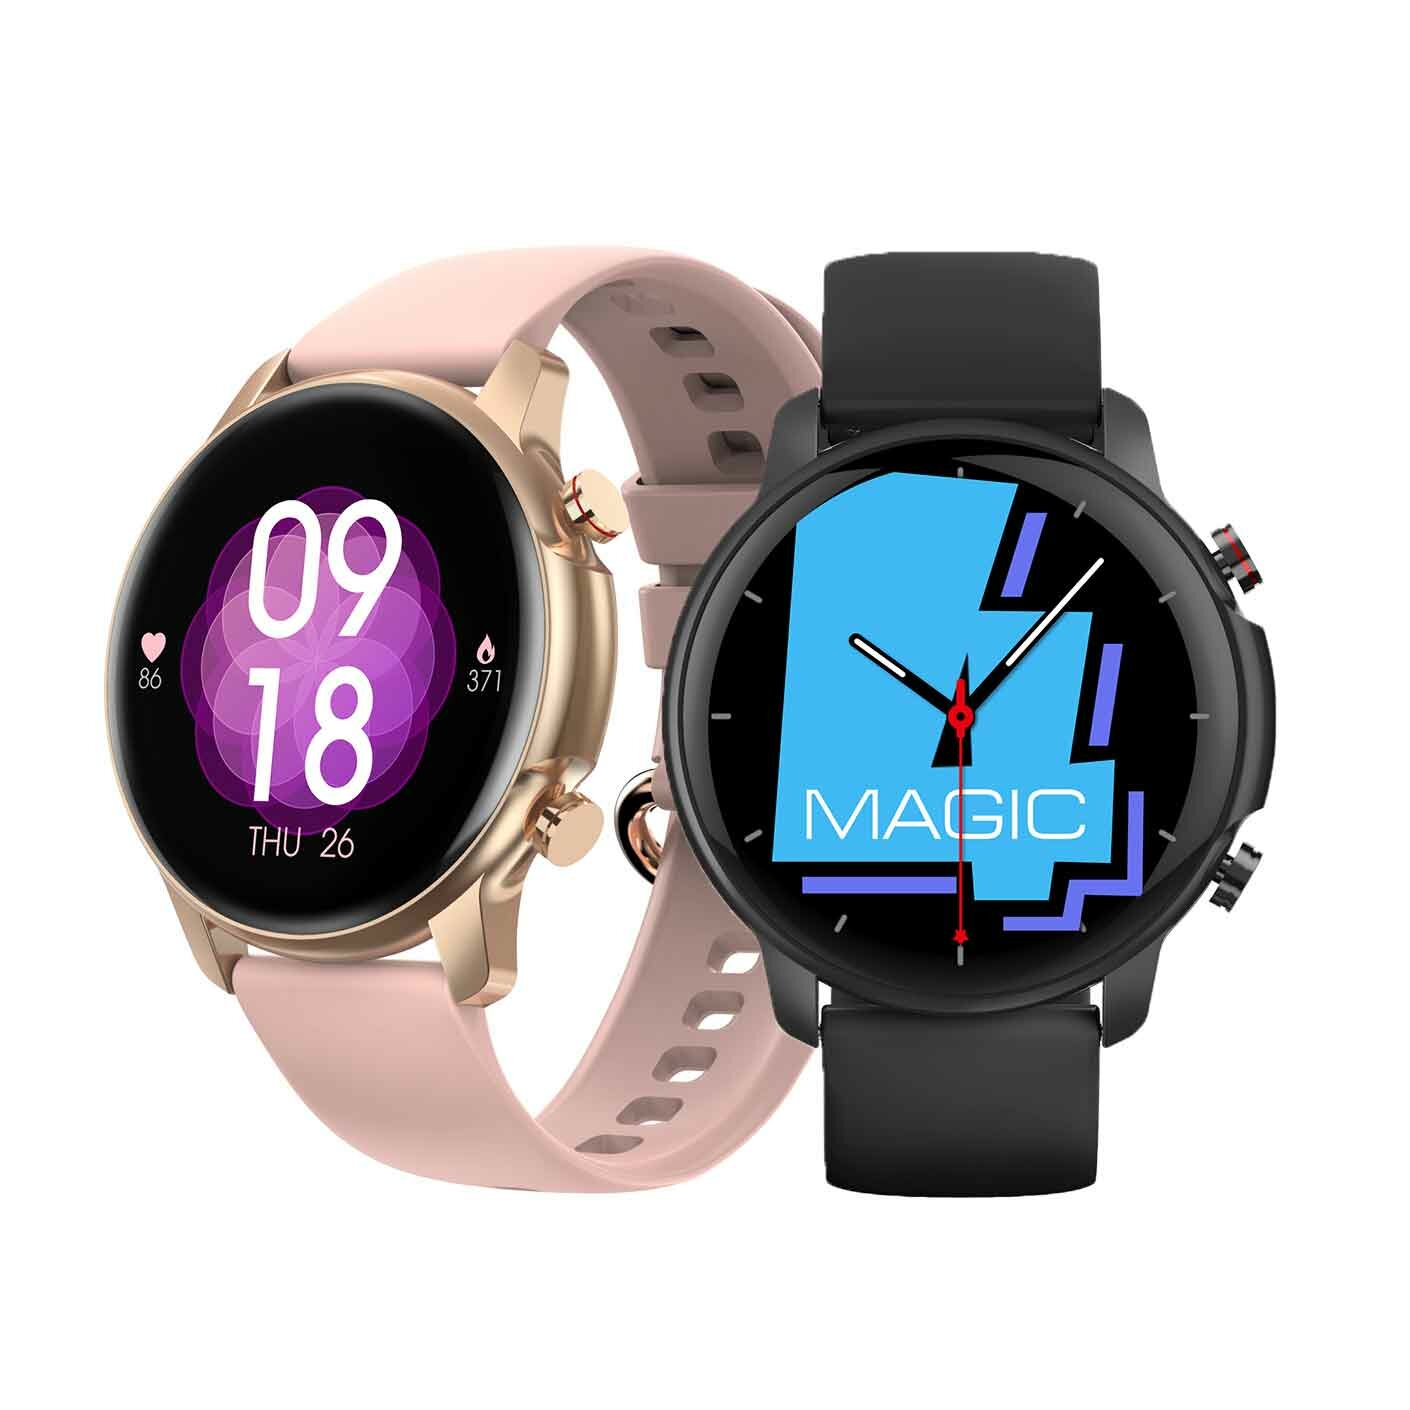 KOSPET Magic 4 9mm Ultra-thin 1.32 inch 360*360 Pixels 385PPI Touch Screen Heart Rate Blood Pressure Monitor 30 Days Lon